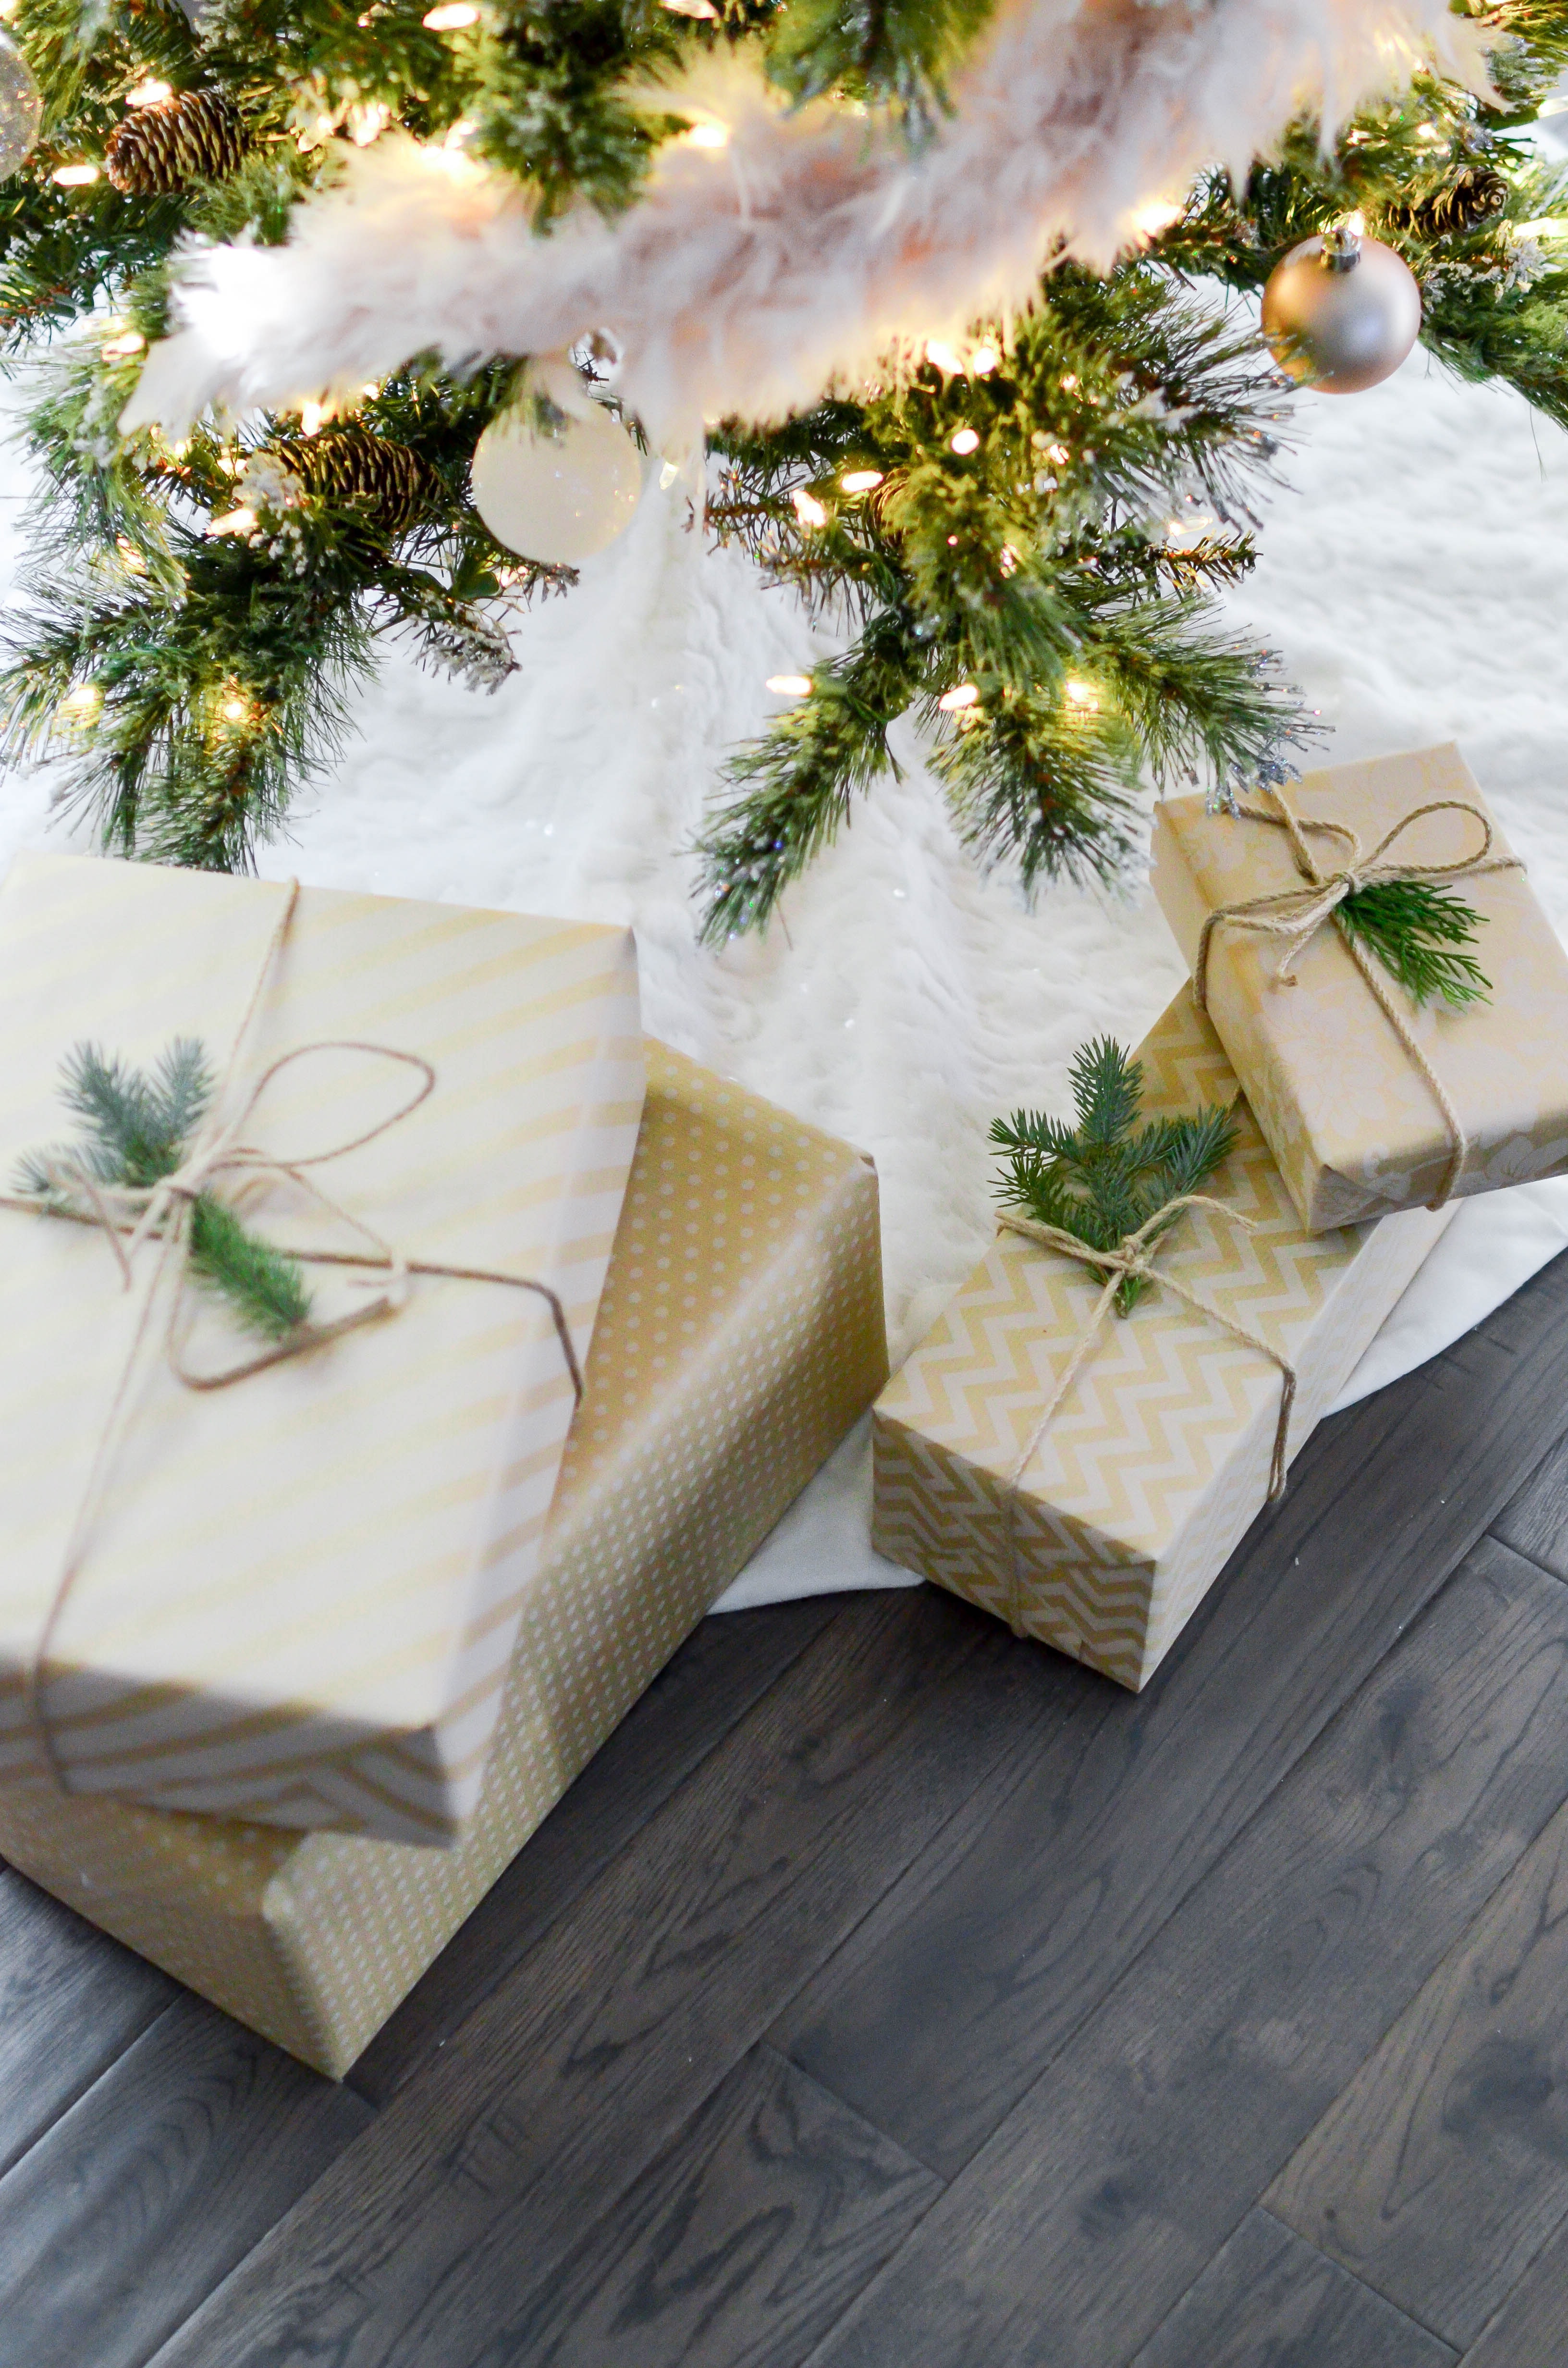 Four gift boxes near lighted string lights